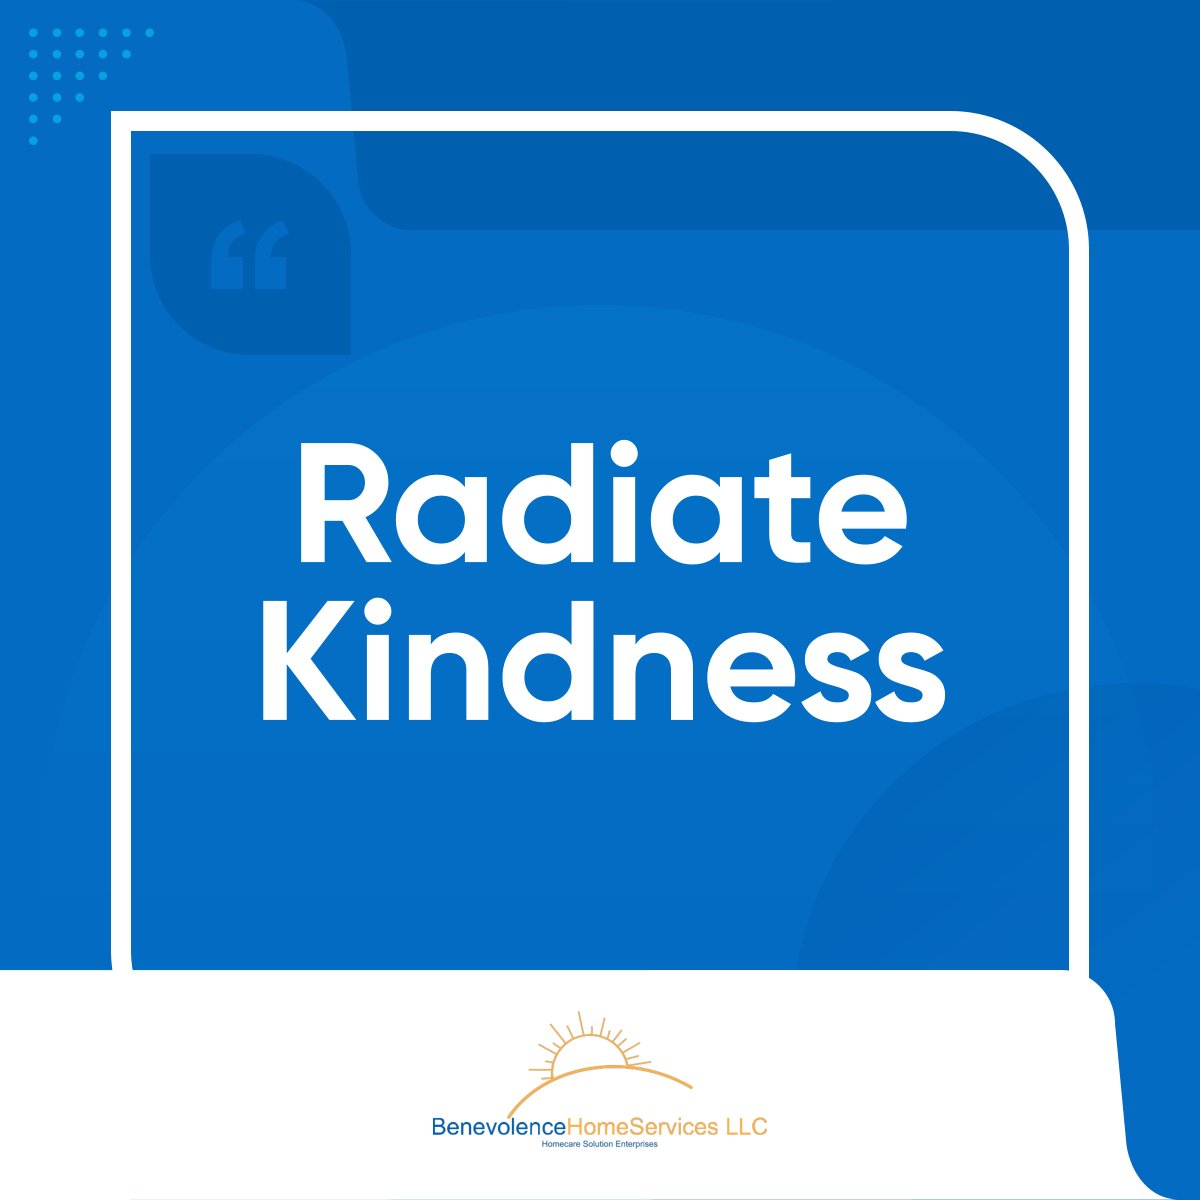 Human as we are, we go through different challenges every once in a while. We all face different challenges every day. That is why we treat each other with kindness as much as possible. It’s the least that we can do for our fellowmen.

#RadiateKindness